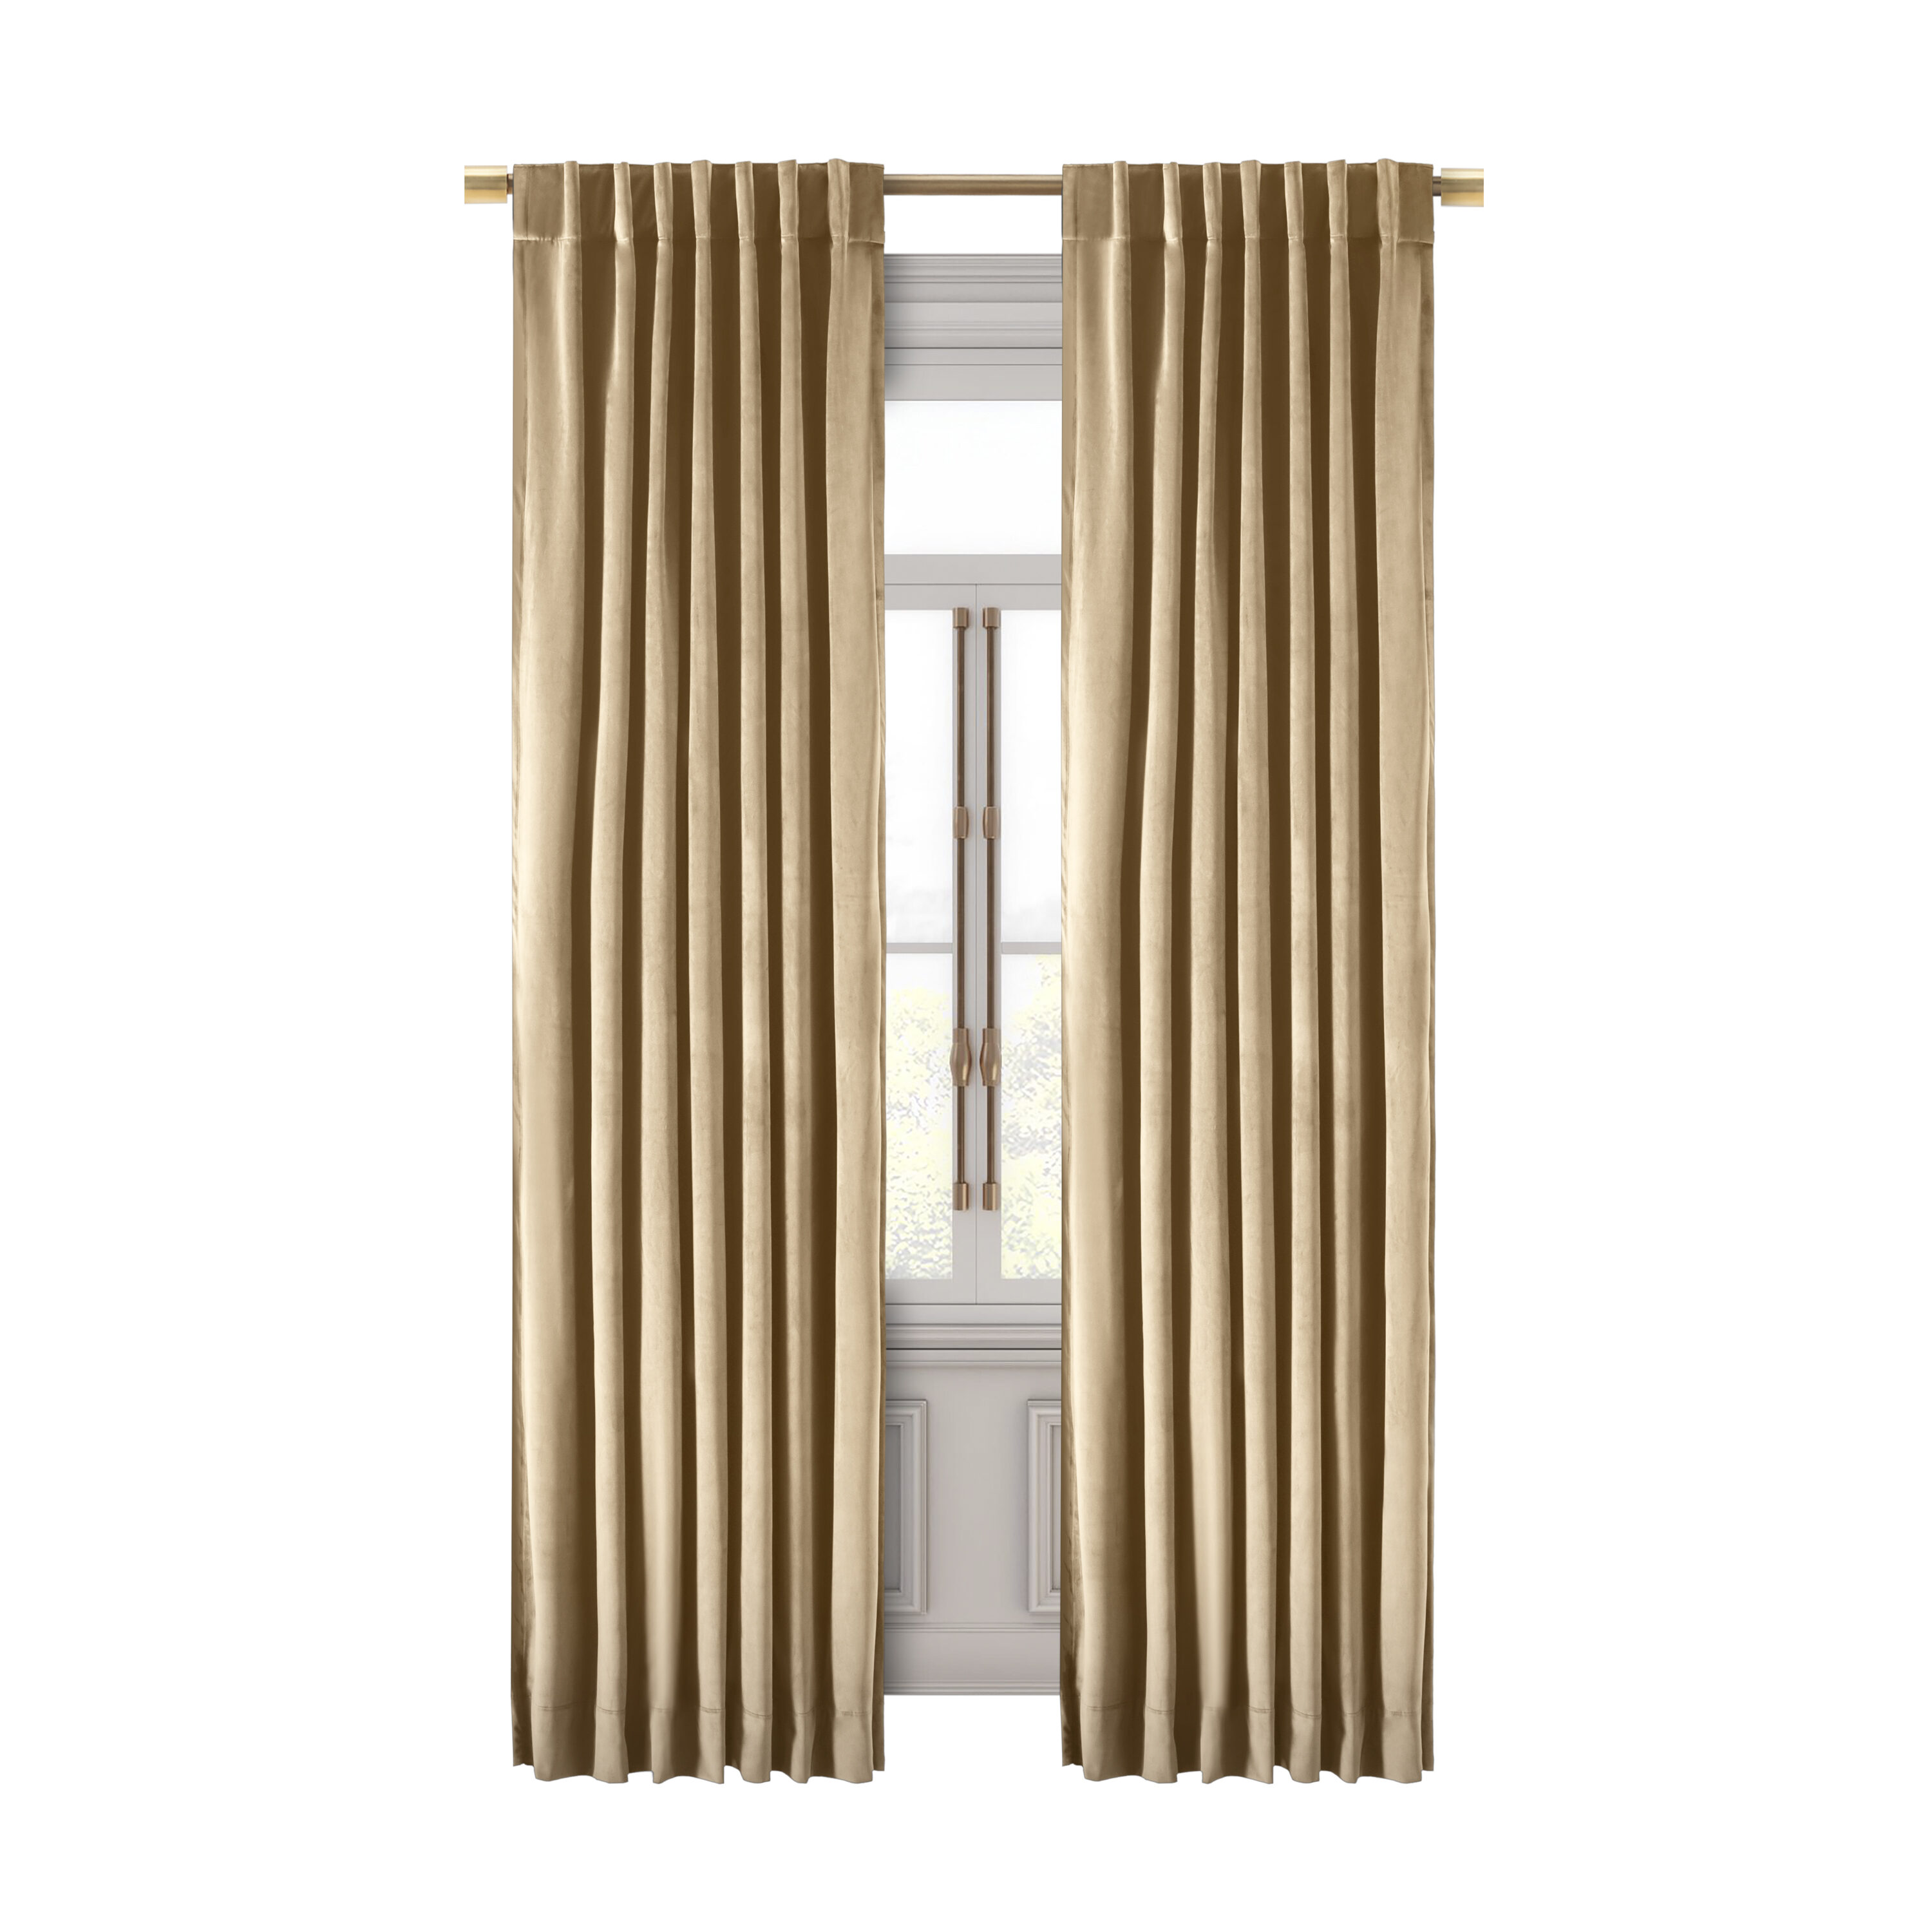 Versatile Eyelet Curtain Rings in Gold and Silver Colors With Low Noise  Feature 10 Pack Ideal for Easy Installations and Window Dressings 